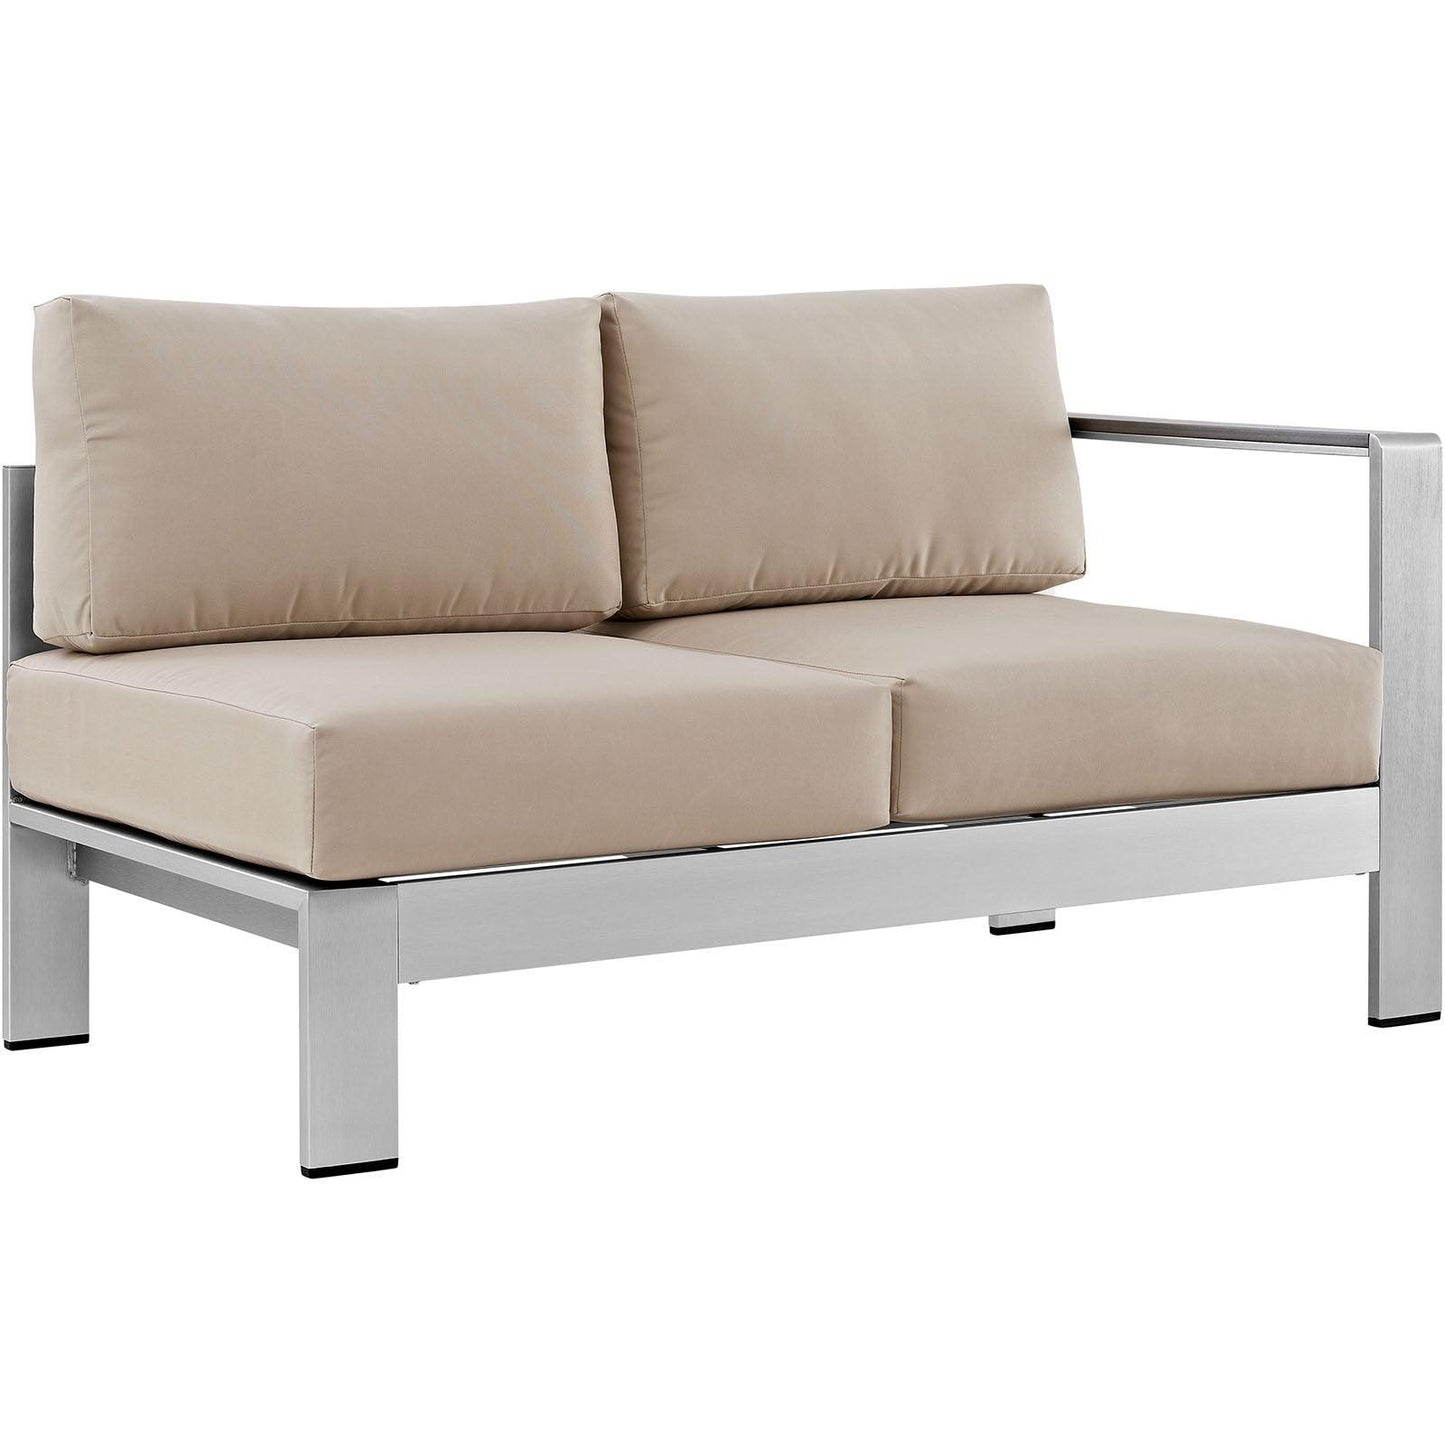 Modway Shore Right-Arm Corner Sectional Outdoor Patio Aluminum Loveseat FredCo